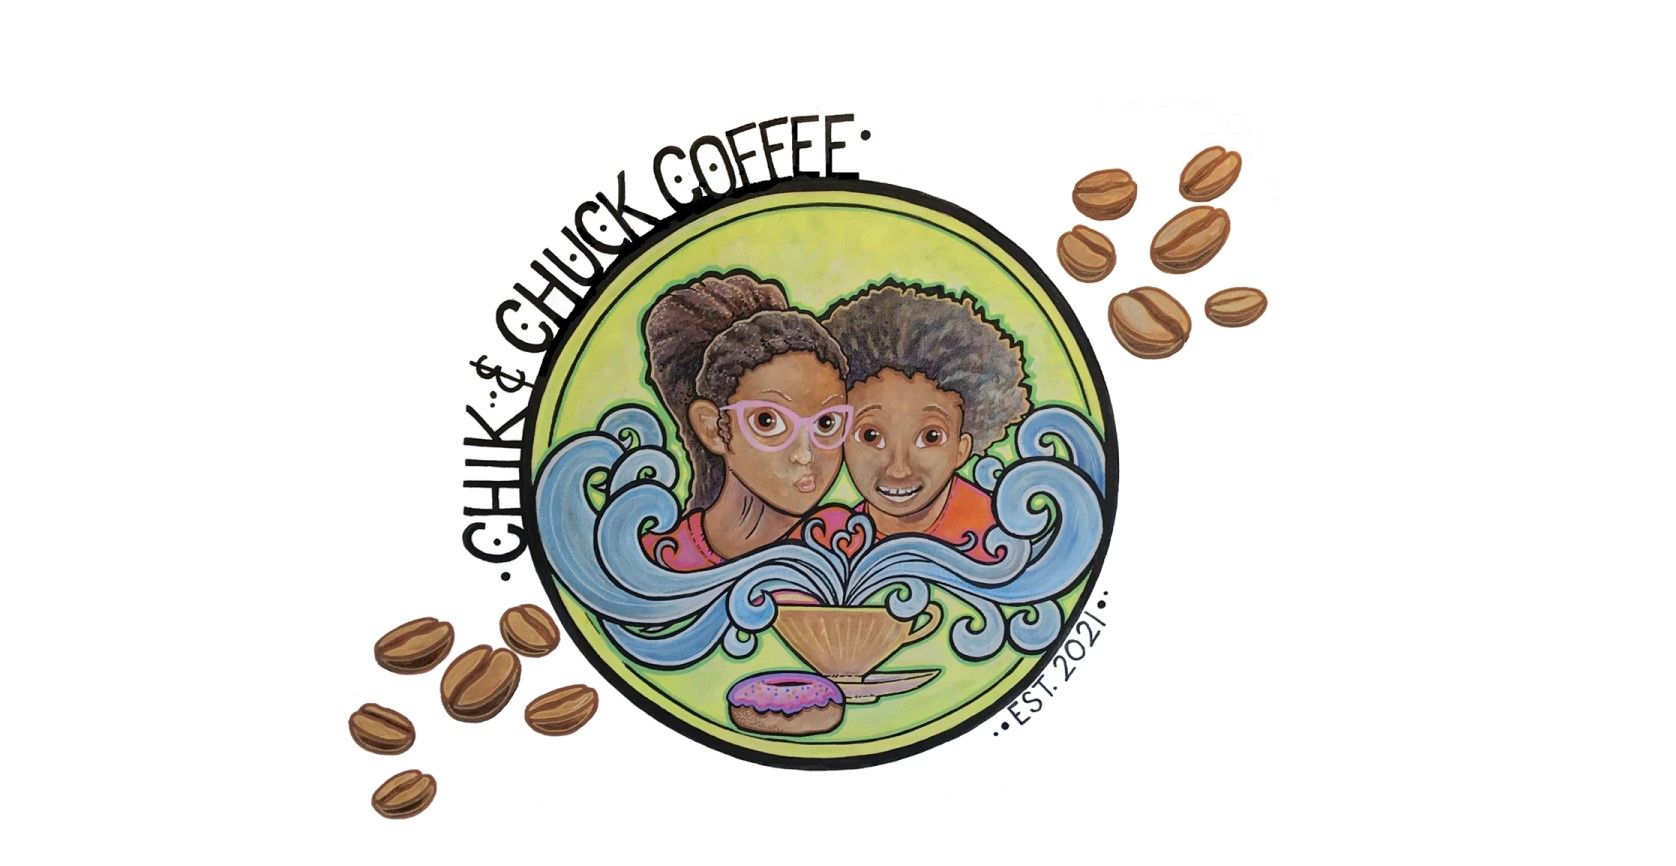 Celebrating With You - Chik & Chuck’s Coffee